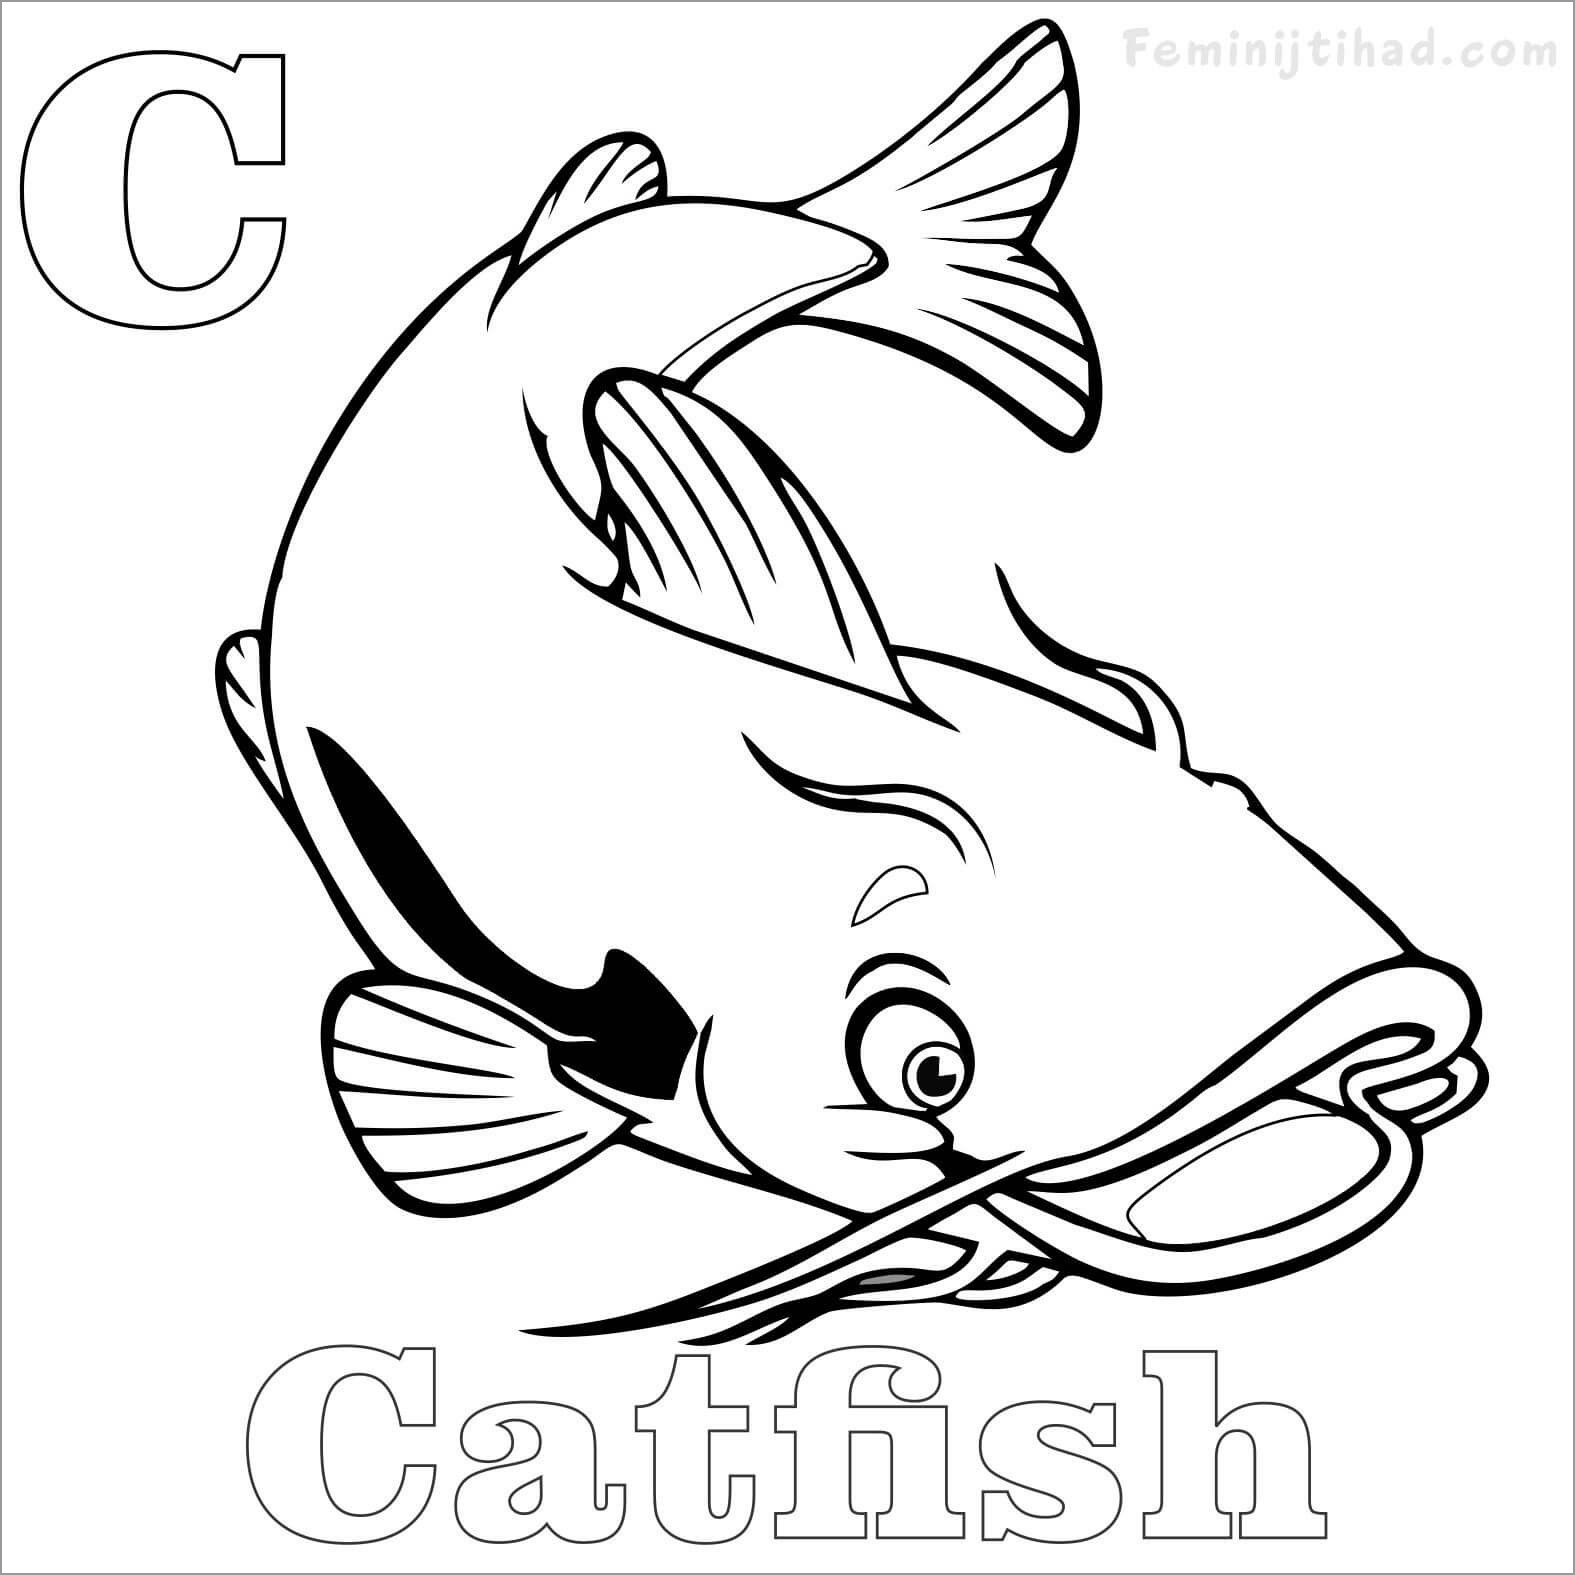 C for Catfish Coloring Page